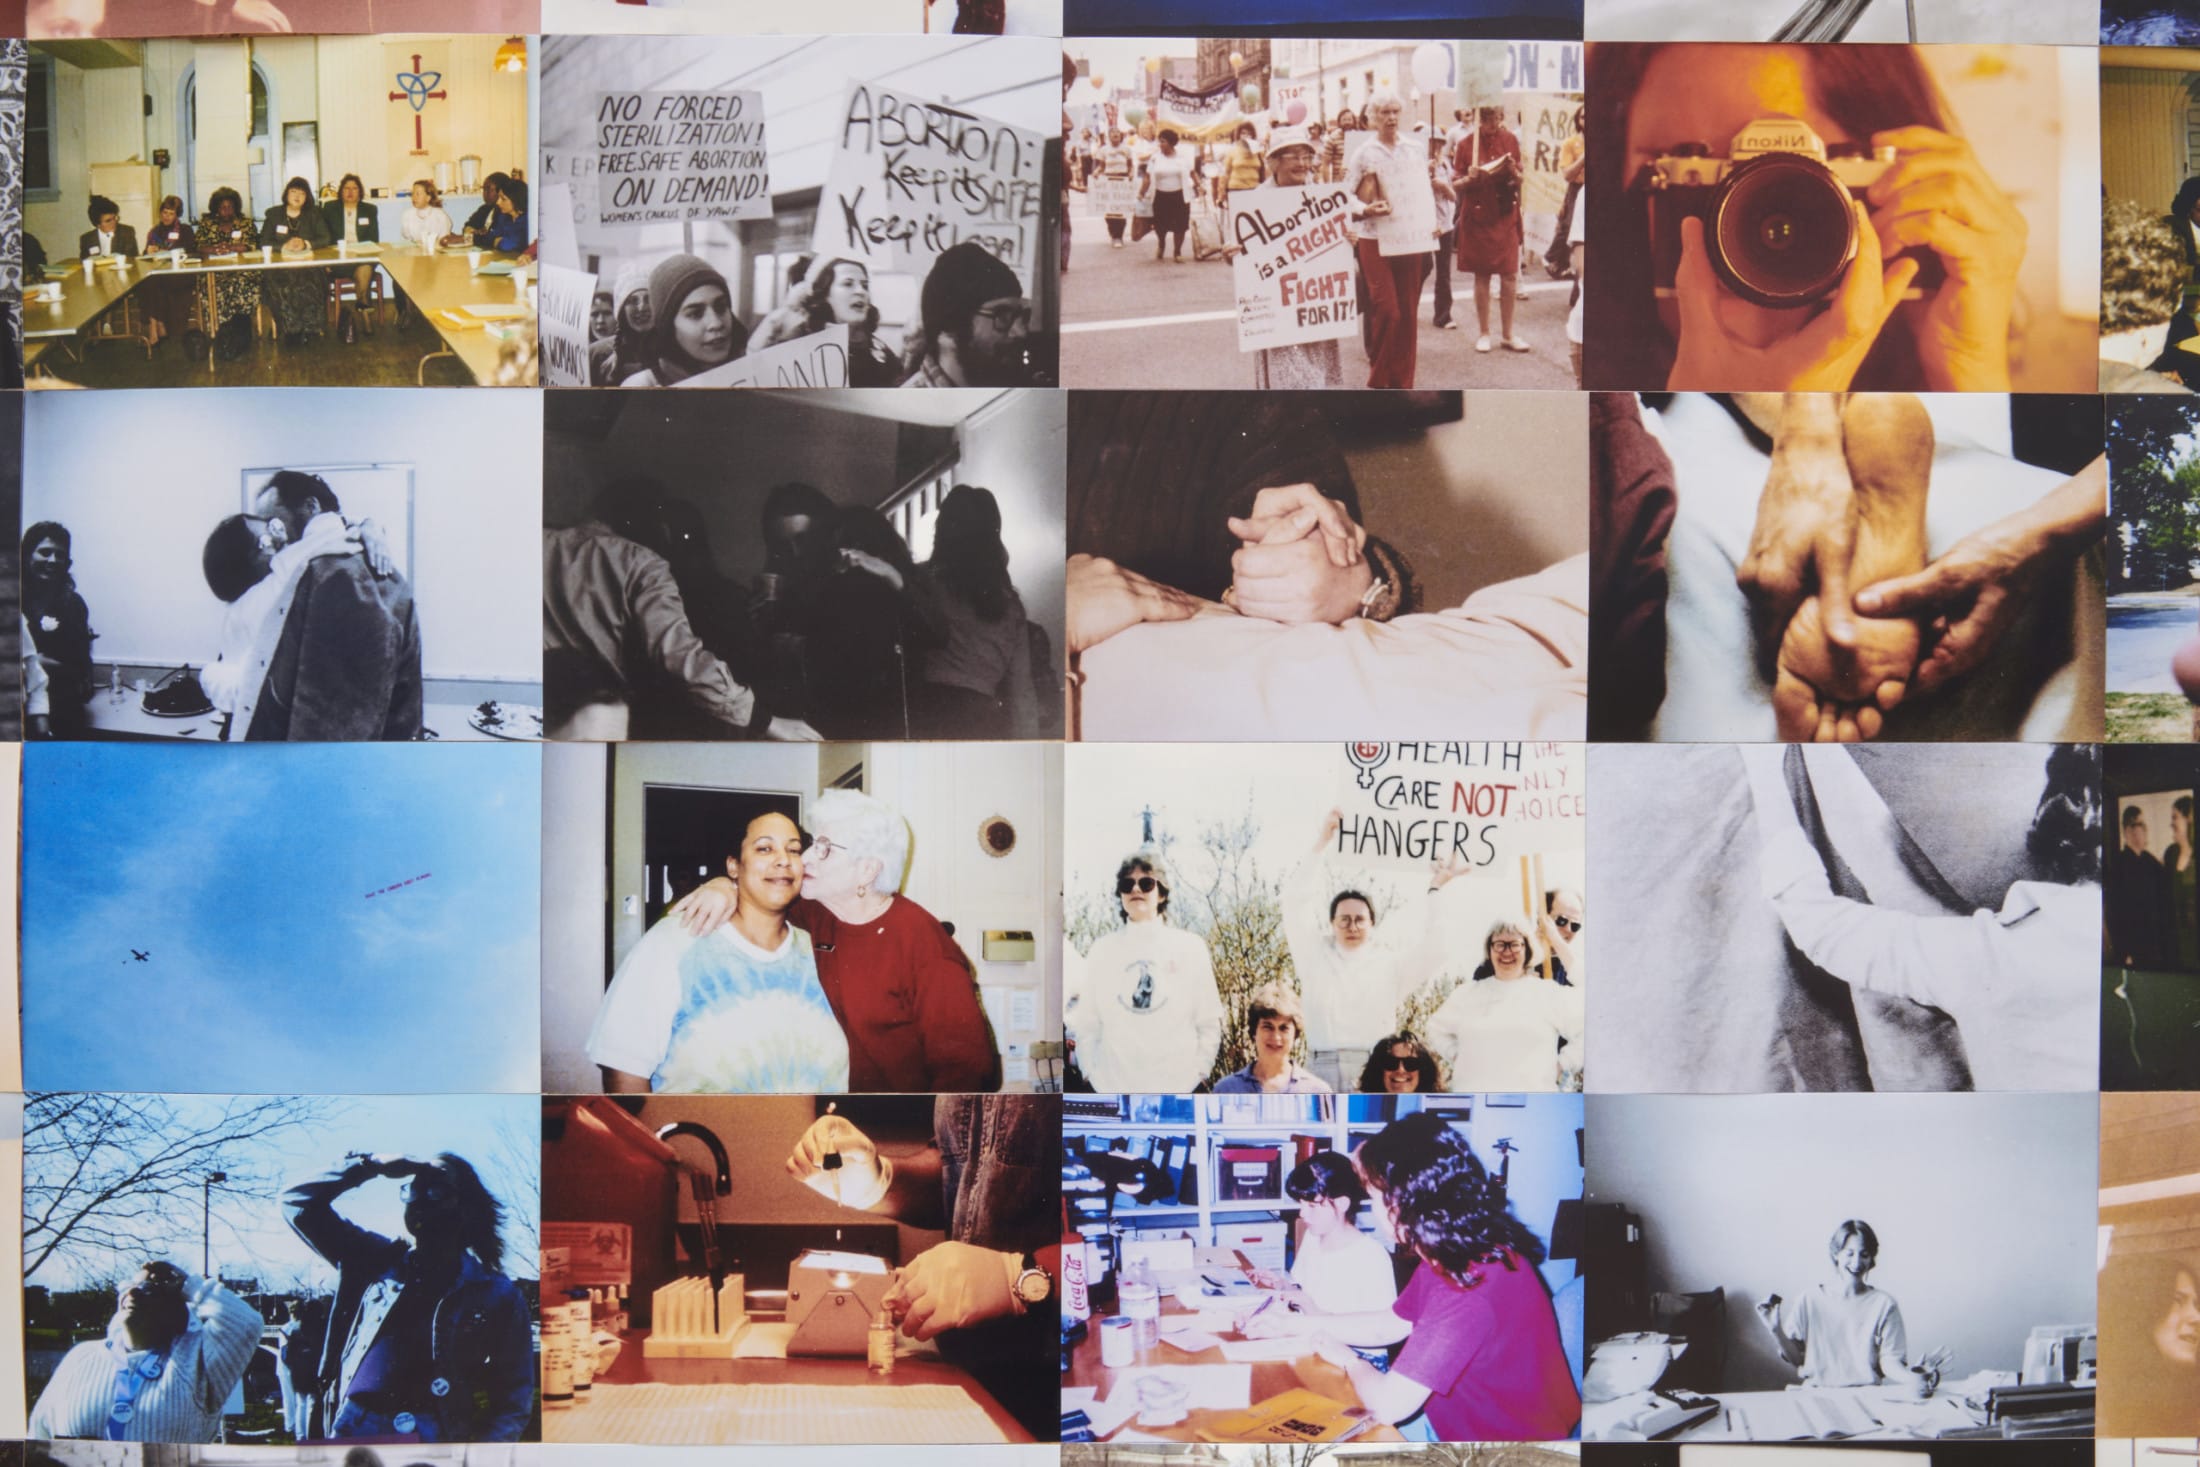 A photo collage of several images of protests. Part of a work by artist Carmen Winant.